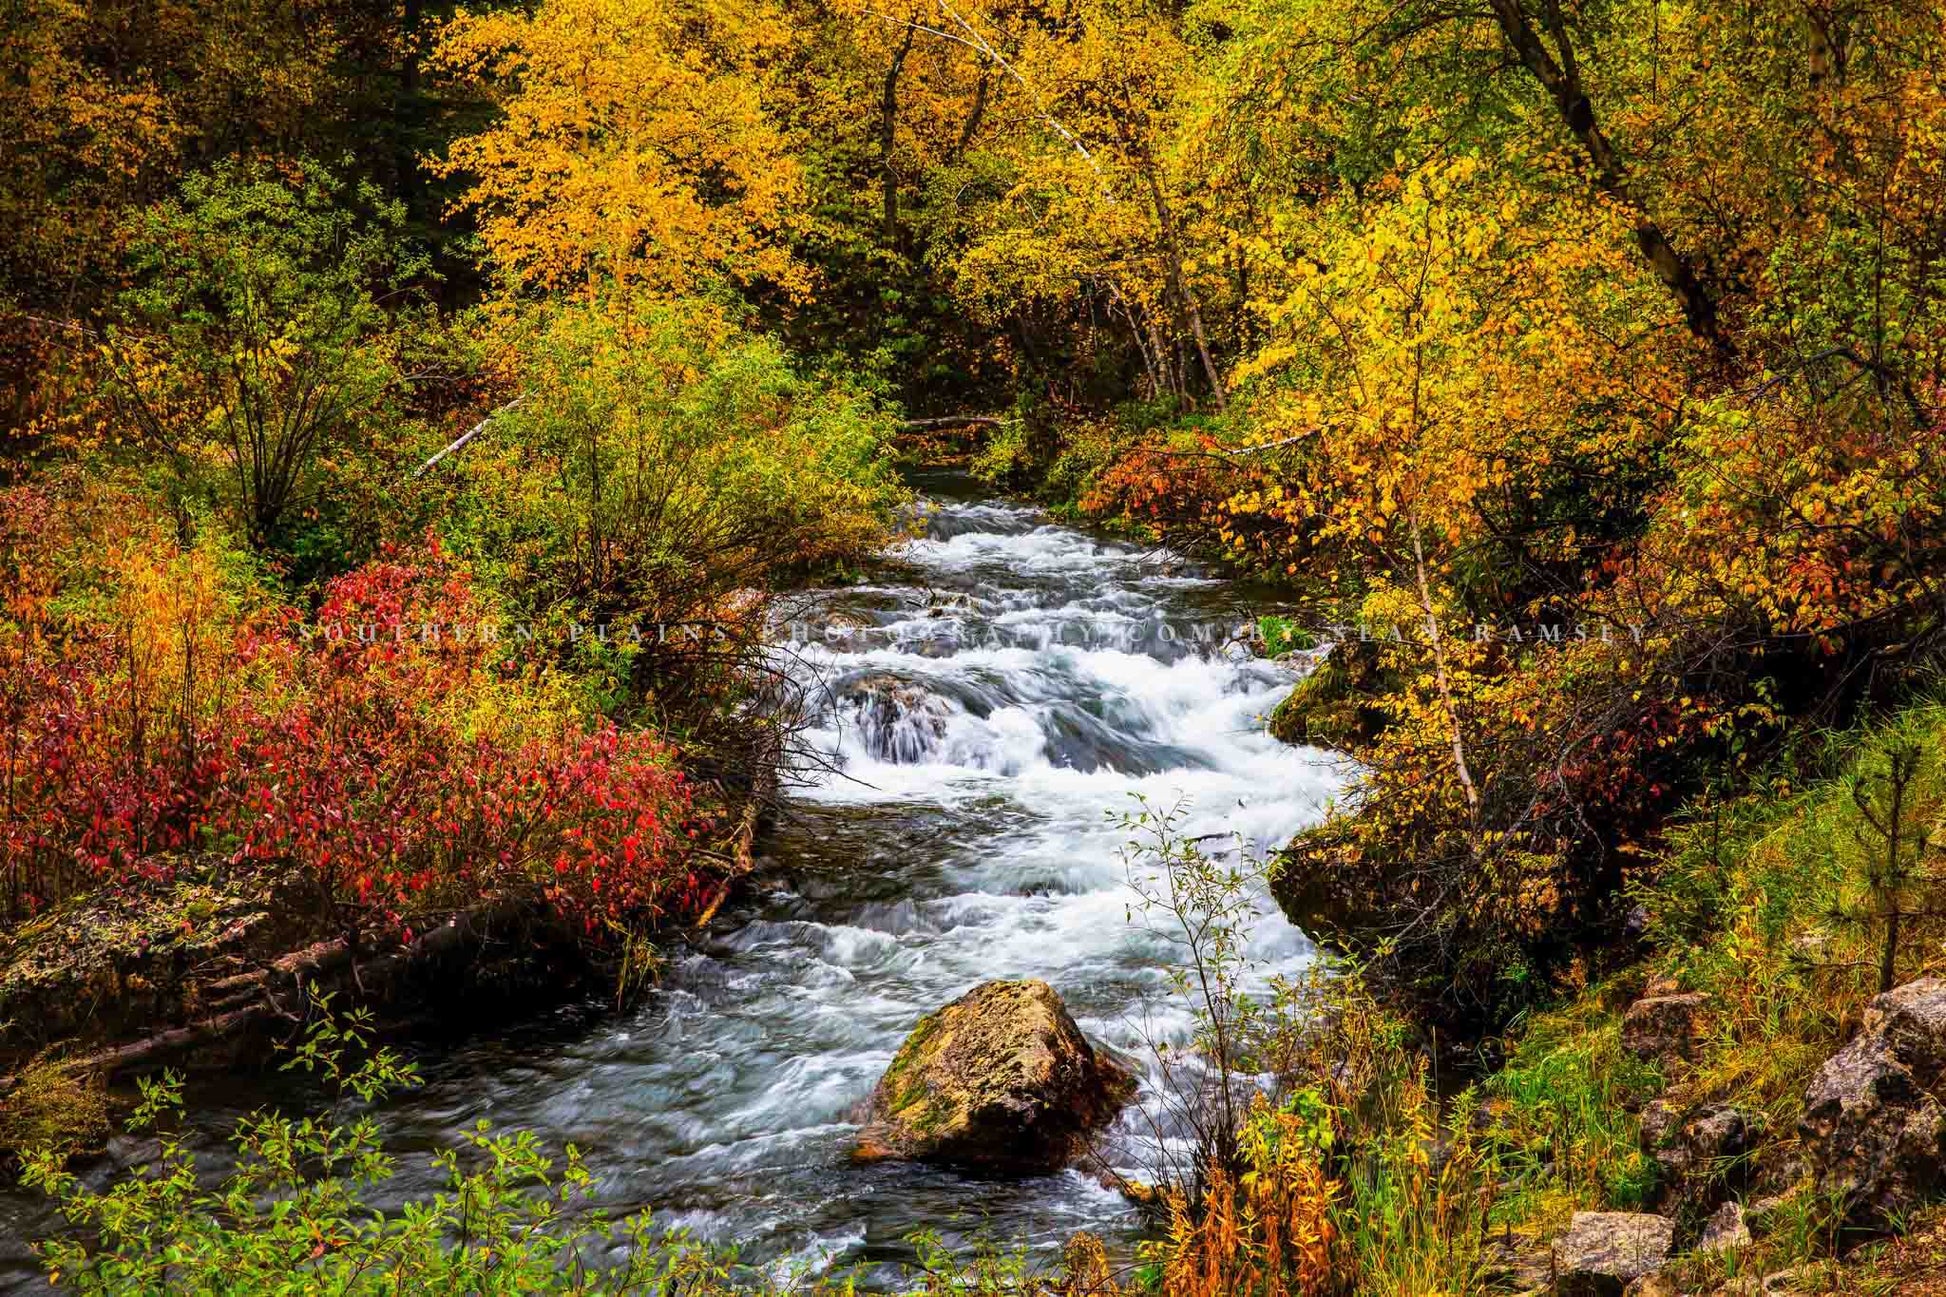 Black Hills photography print of Spearfish Creek flowing through fall color on an autumn day in Spearfish Canyon in South Dakota by Sean Ramsey of Southern Plains Photography.